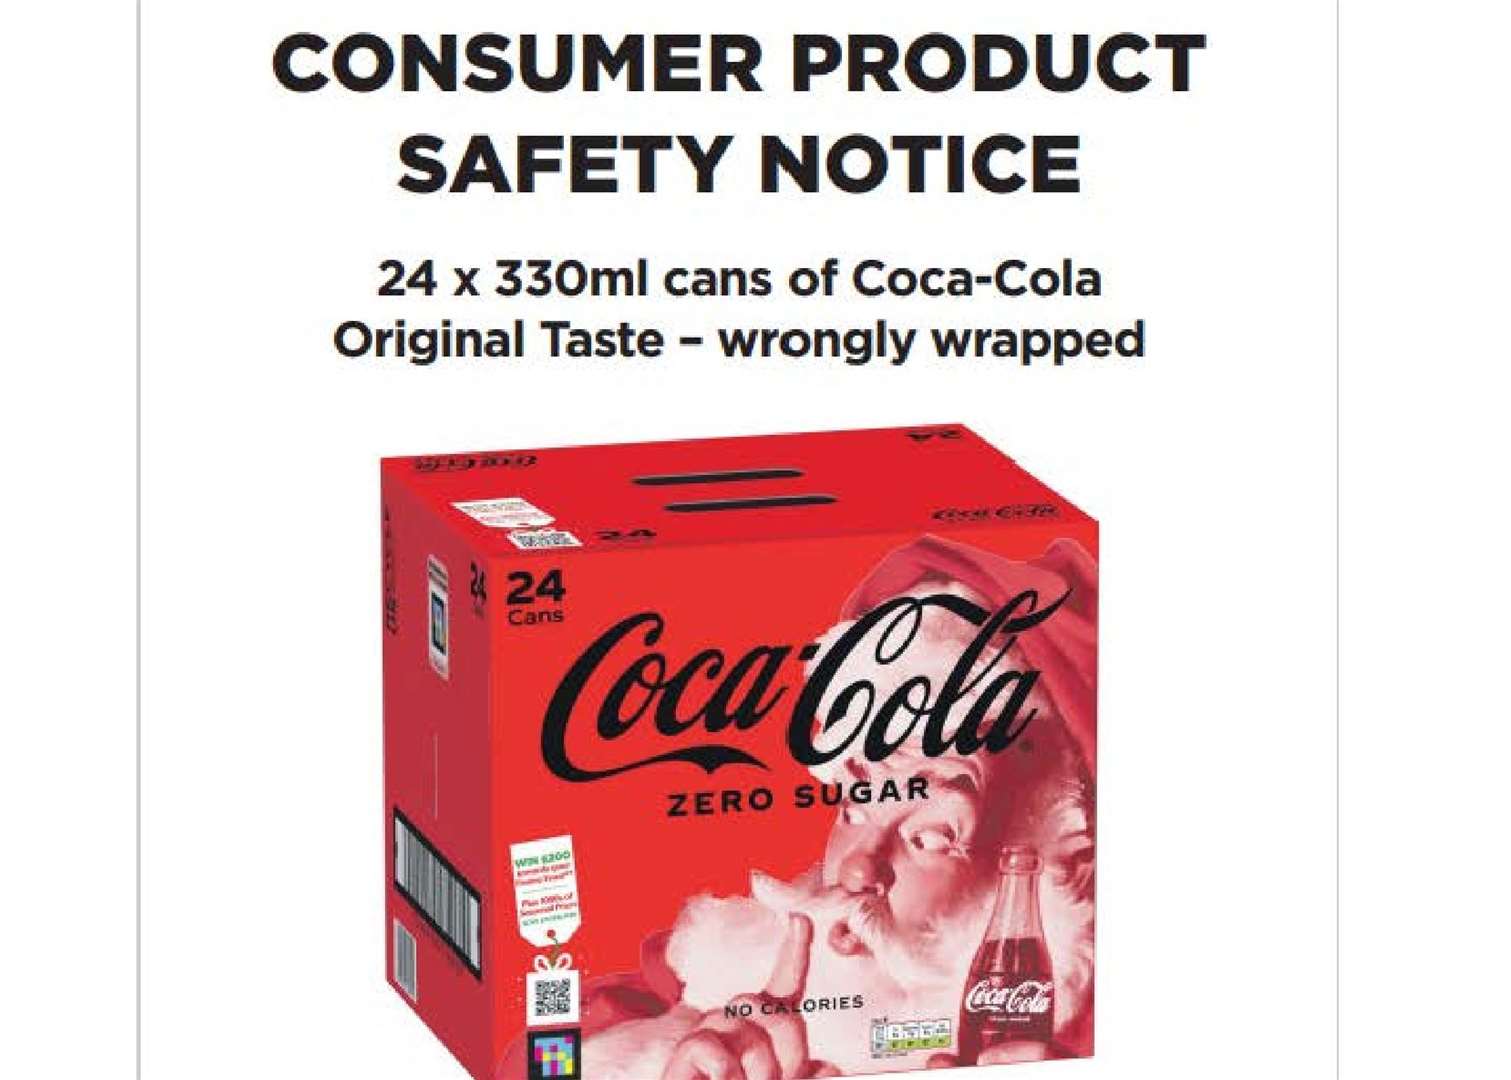 CocaCola recalls Zero Sugar cans with Father Christmas packaging and